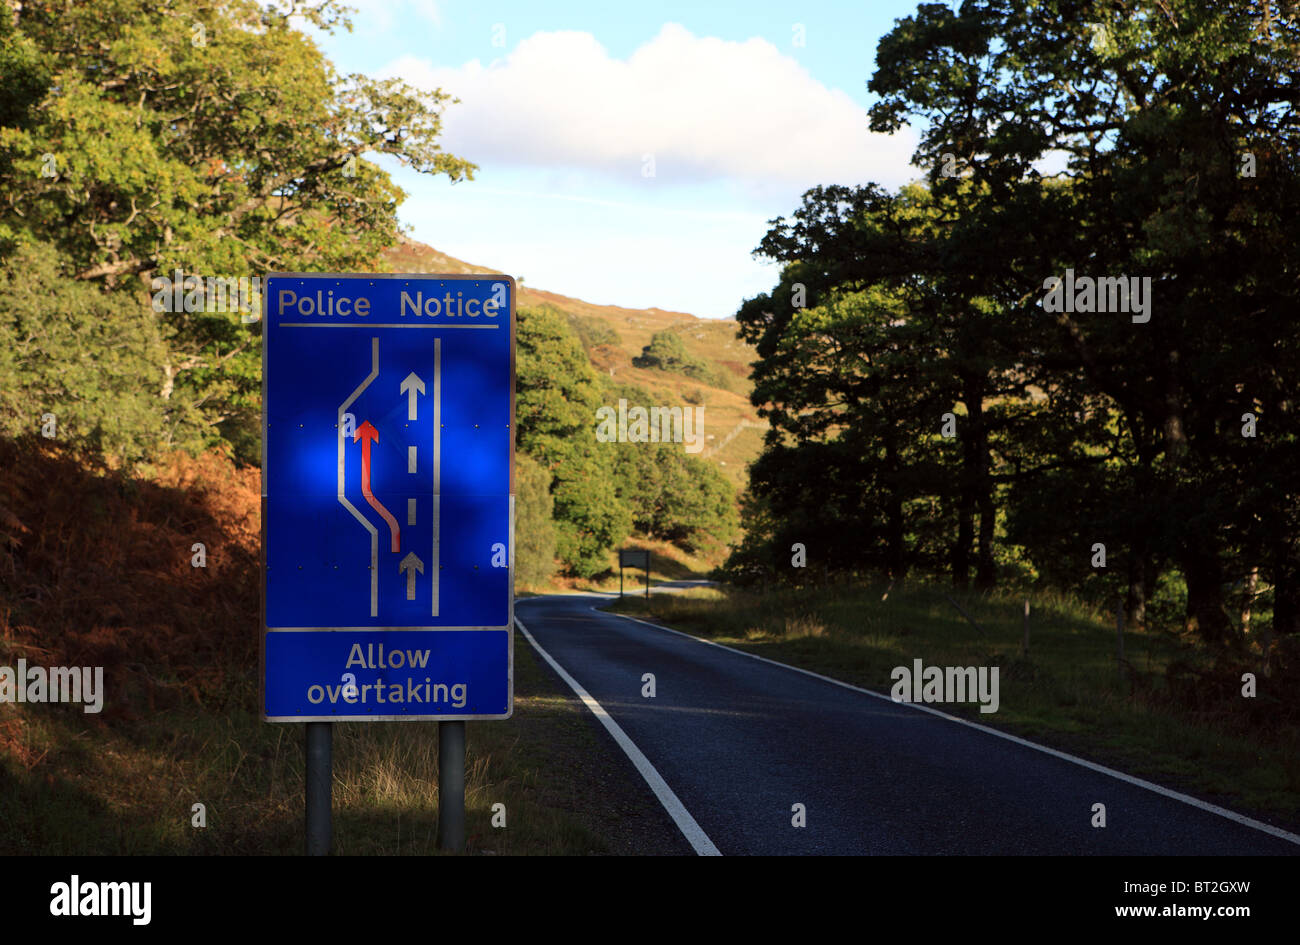 Allow overtaking notice on a single track road in Argyll Scotland Stock Photo